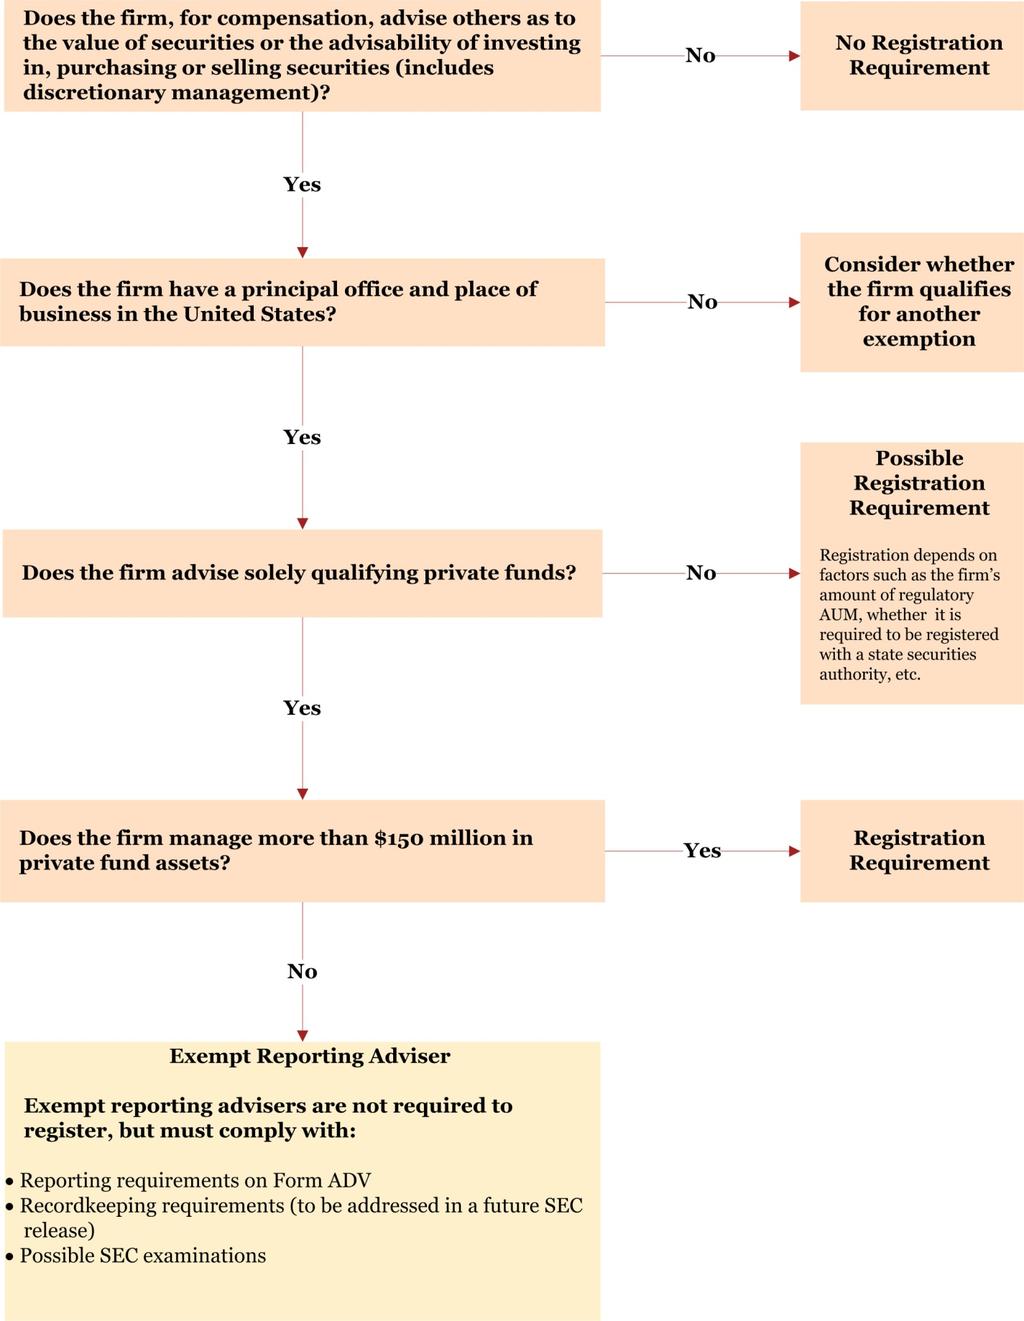 US advisers to private funds: Determining whether registration is required *These charts are provided to show the